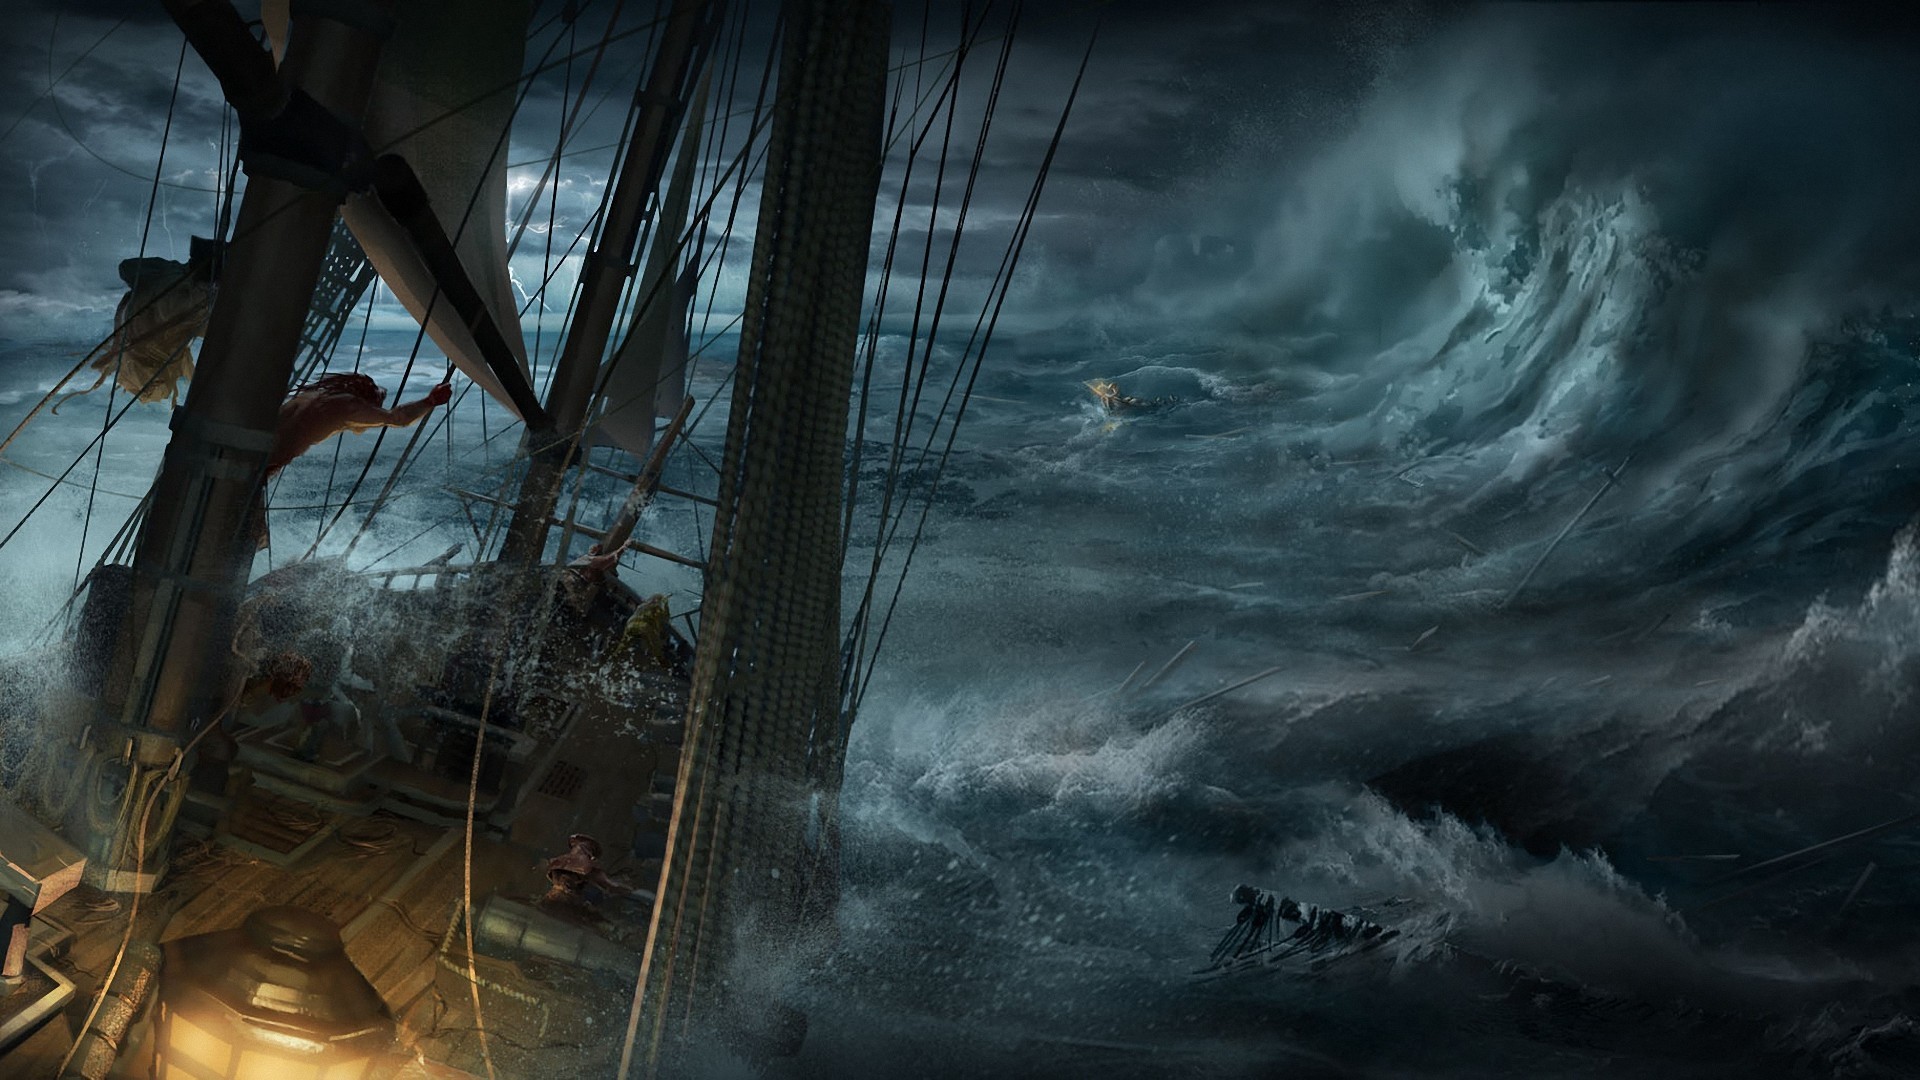 Ship in a stormy sea wallpapers and images - wallpapers, pictures ...